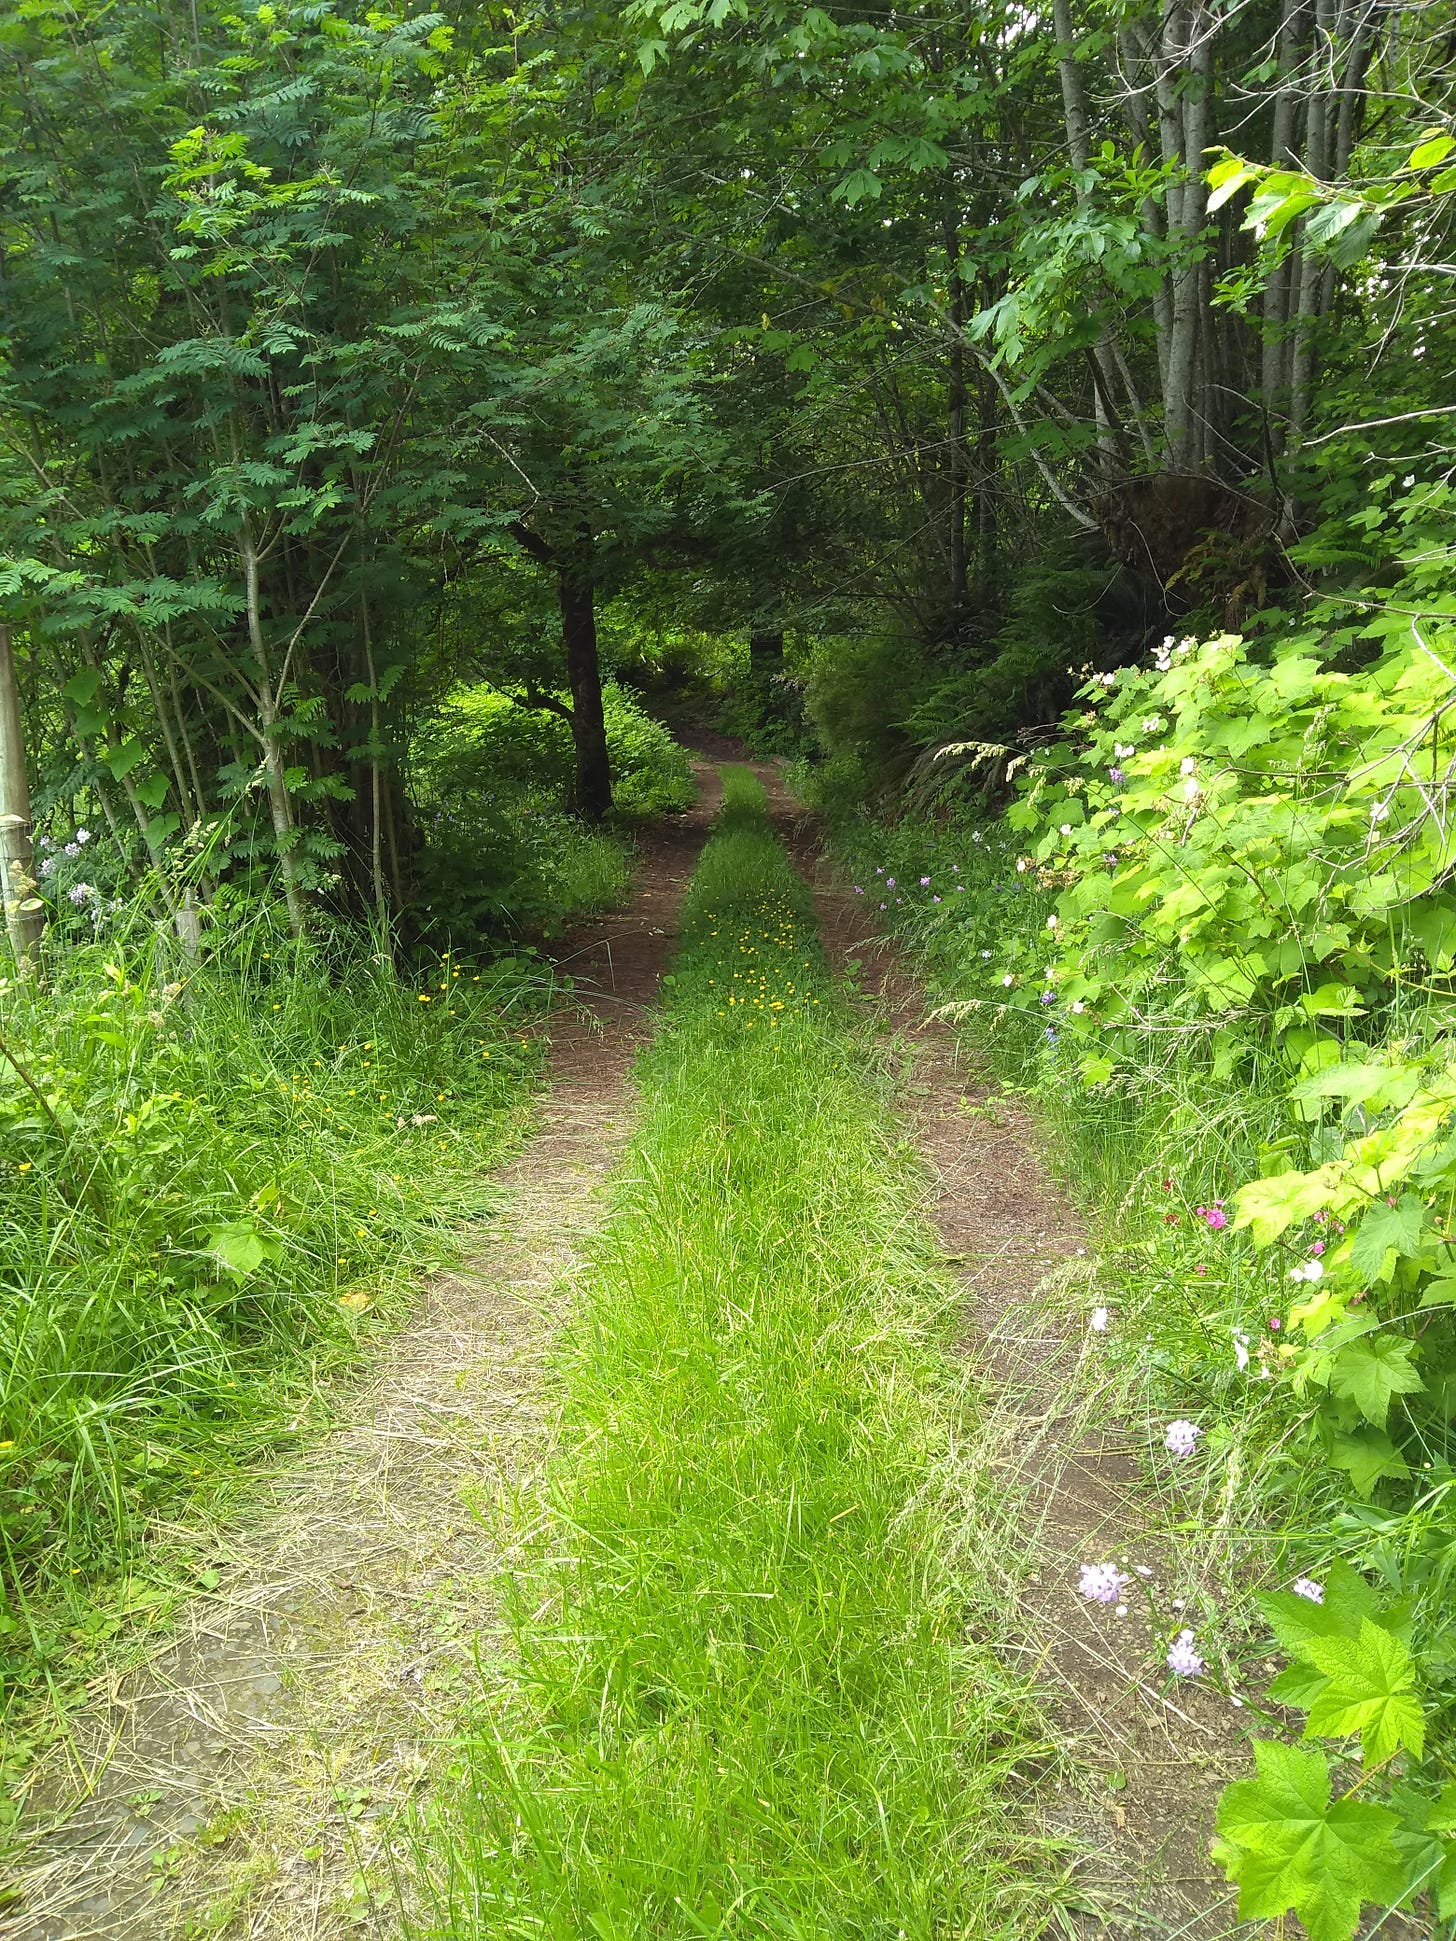 An old gravel driveway leads away through a tangle of green growth, trees, and wildflowers.